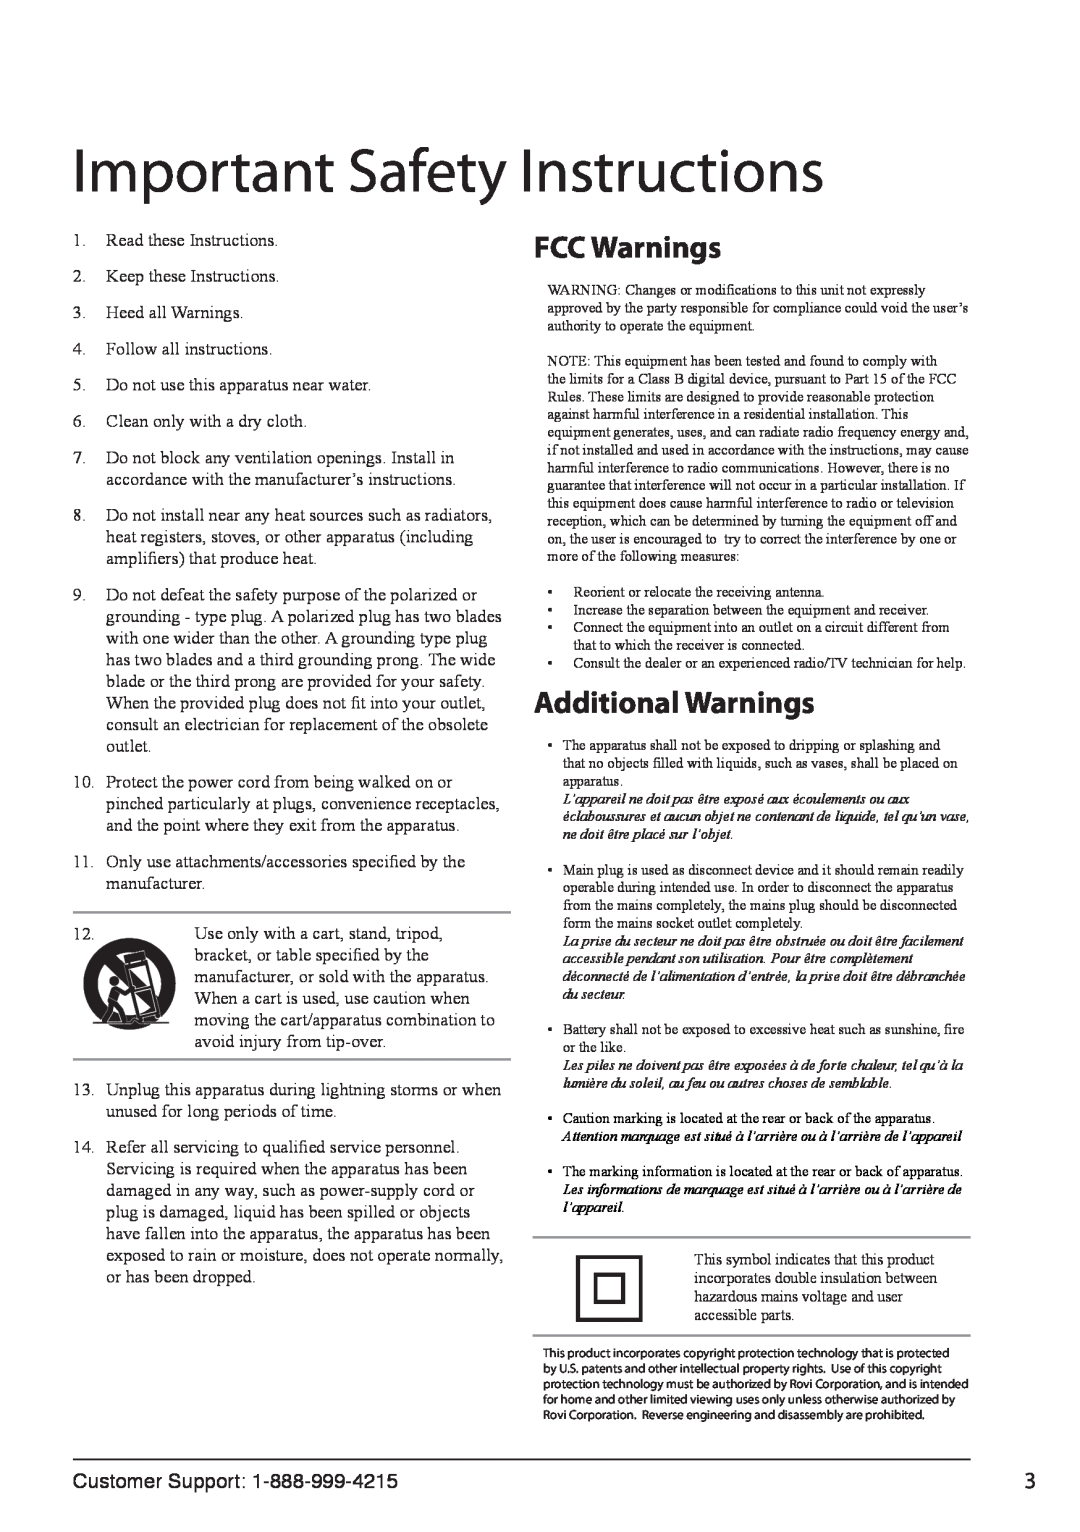 GPX PD701 manual Important Safety Instructions, FCC Warnings, Additional Warnings 